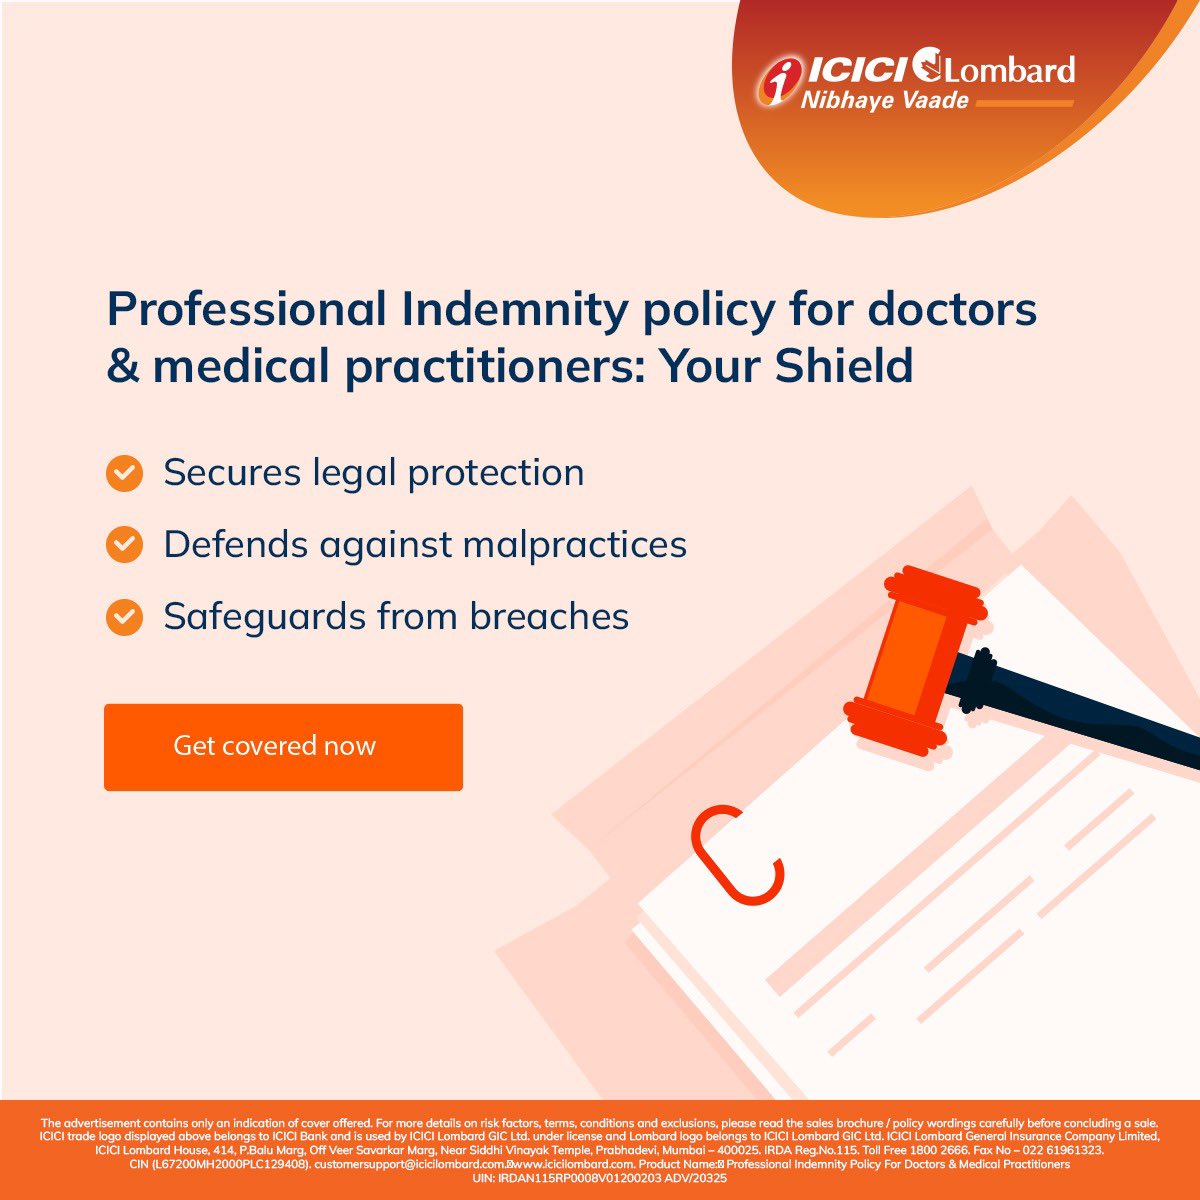 Shielding medical professionals from legal liabilities and malpractice claims, our Professional Indemnity policy offers comprehensive protection. Get covered today and secure your practice against unforeseen risks. Visit now: sme.icicilombard.com #NibhayeVaade #ICICILombard…